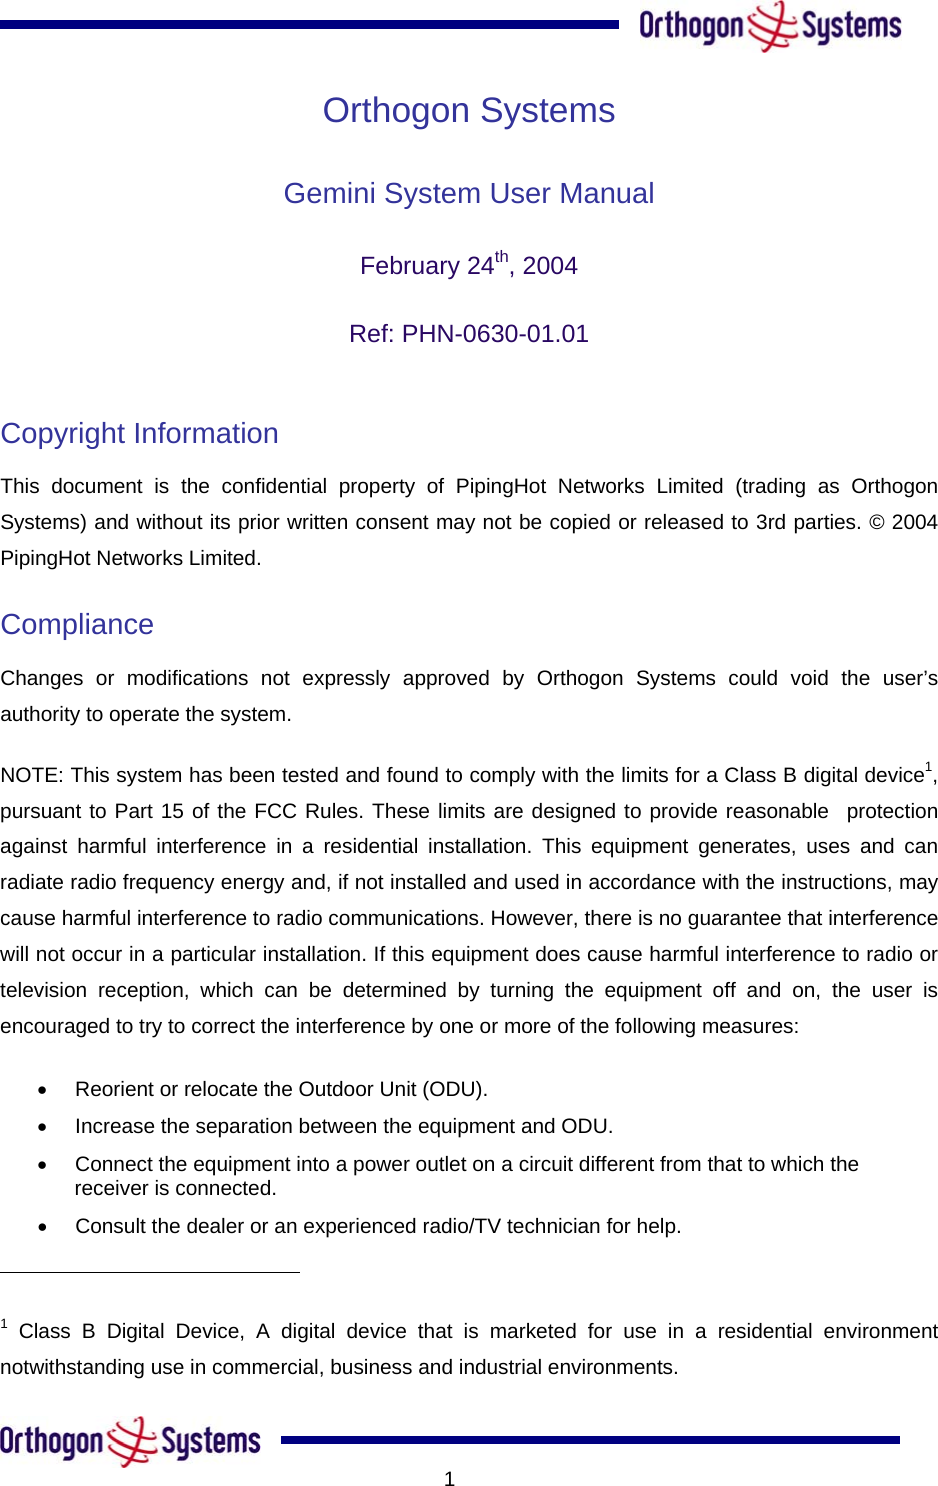      Orthogon Systems Gemini System User Manual  February 24th, 2004  Ref: PHN-0630-01.01  Copyright Information  This document is the confidential property of PipingHot Networks Limited (trading as Orthogon Systems) and without its prior written consent may not be copied or released to 3rd parties. © 2004 PipingHot Networks Limited.  Compliance  Changes or modifications not expressly approved by Orthogon Systems could void the user’s authority to operate the system.  NOTE: This system has been tested and found to comply with the limits for a Class B digital device1, pursuant to Part 15 of the FCC Rules. These limits are designed to provide reasonable  protection against harmful interference in a residential installation. This equipment generates, uses and can radiate radio frequency energy and, if not installed and used in accordance with the instructions, may cause harmful interference to radio communications. However, there is no guarantee that interference will not occur in a particular installation. If this equipment does cause harmful interference to radio or television reception, which can be determined by turning the equipment off and on, the user is encouraged to try to correct the interference by one or more of the following measures:  •  Reorient or relocate the Outdoor Unit (ODU).  •  Increase the separation between the equipment and ODU.  •  Connect the equipment into a power outlet on a circuit different from that to which the receiver is connected.  •  Consult the dealer or an experienced radio/TV technician for help.                                                        1 Class B Digital Device, A digital device that is marketed for use in a residential environment notwithstanding use in commercial, business and industrial environments.      1